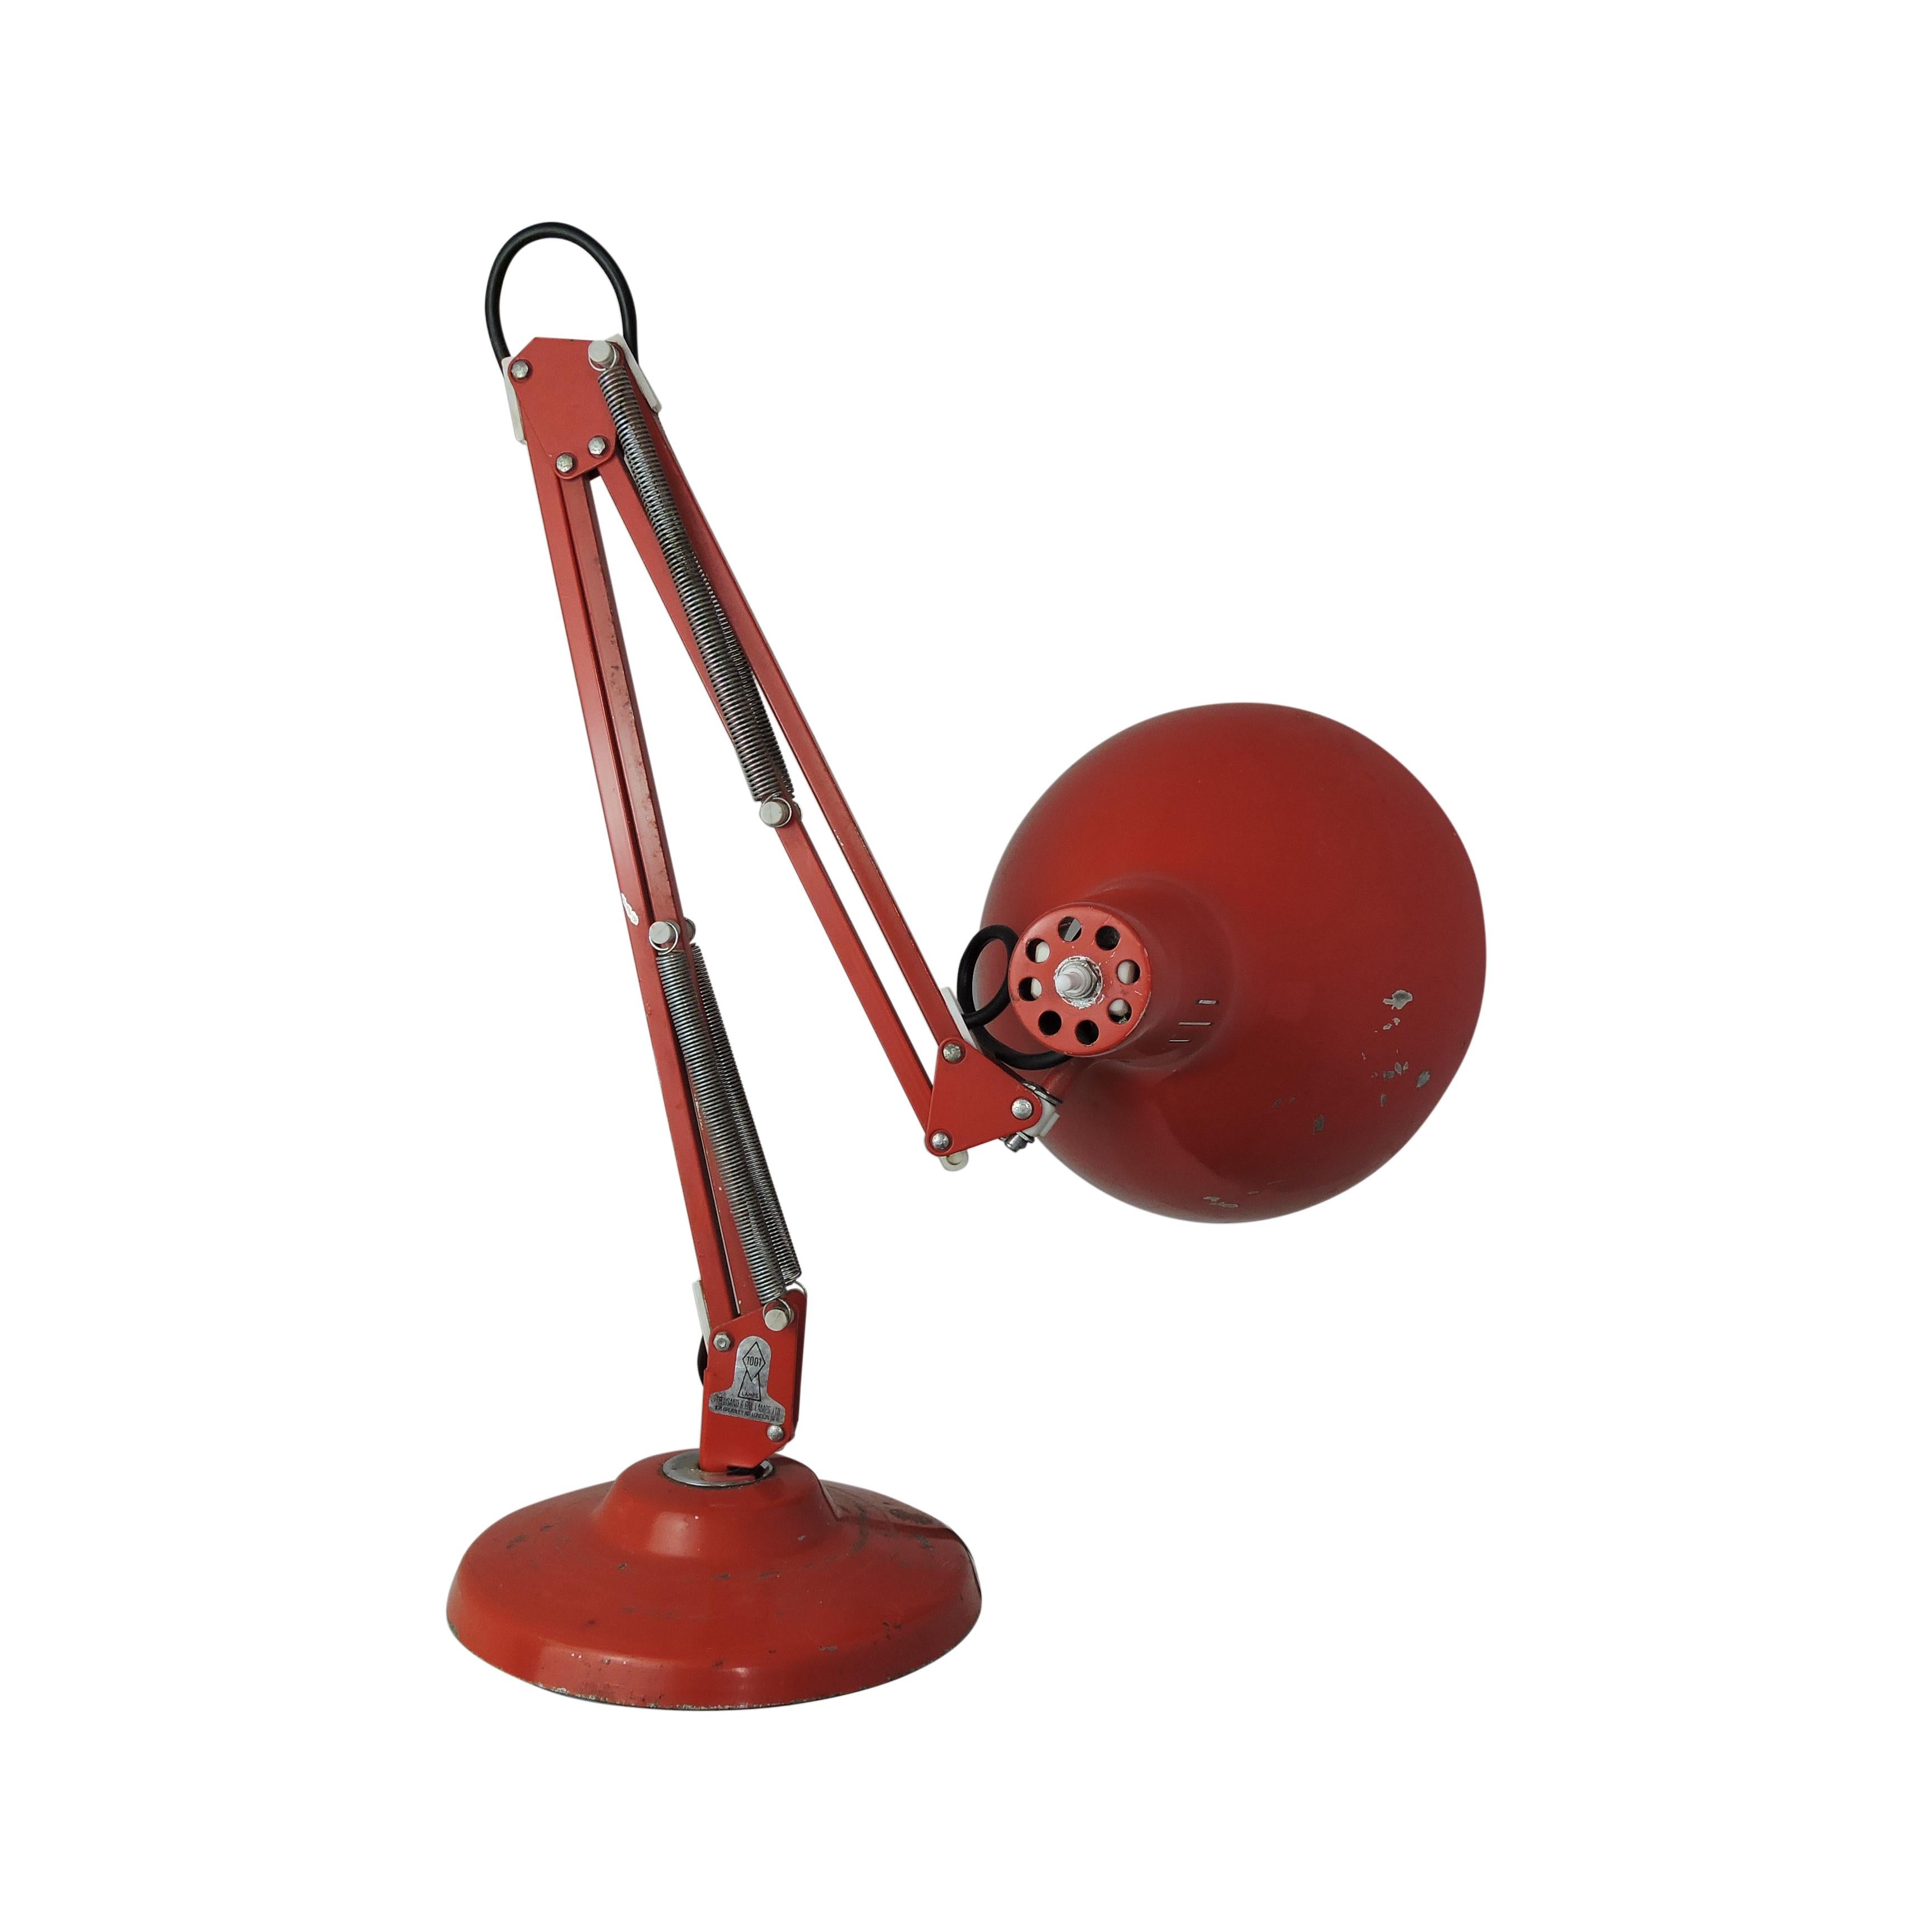 This red balanced arm desk lamp was made by 1001 Lamps, London. The label on the bottom of the arm reads 1001 One Thousand and One Lamps Ltd, 108 Bromley Road, London SE6.